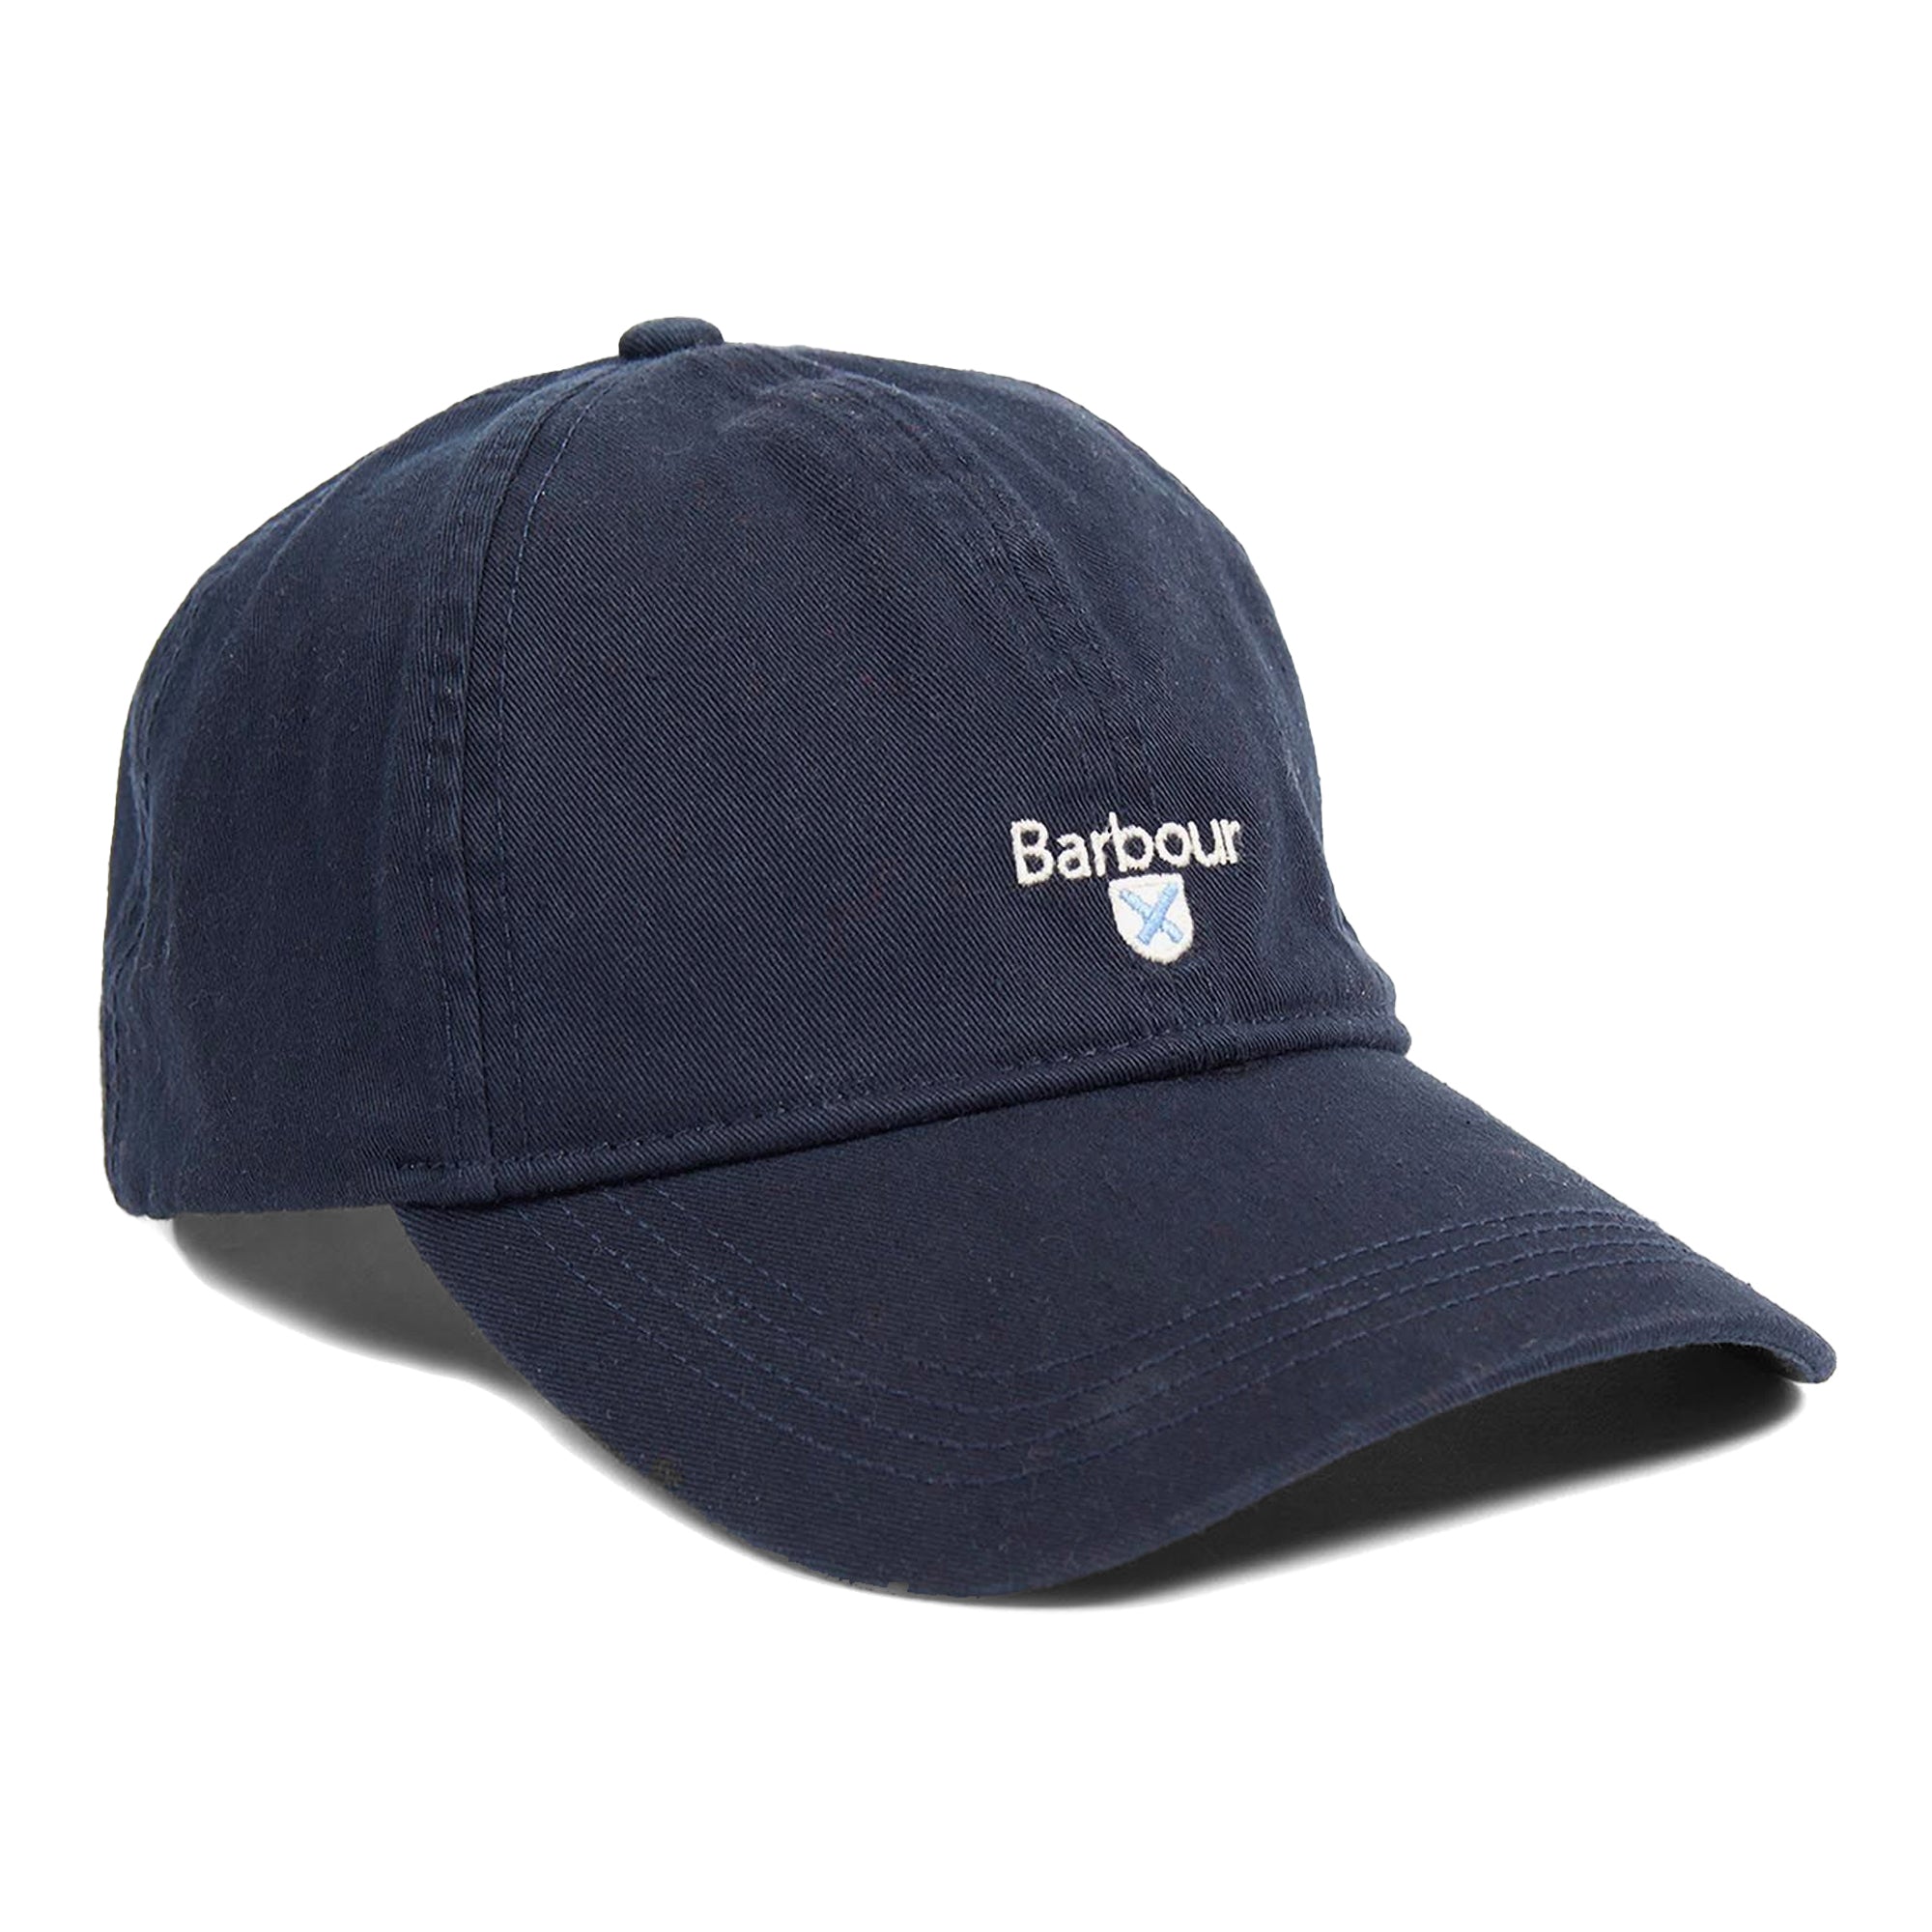 Barbour Cascade Washed Sports Cap - Navy